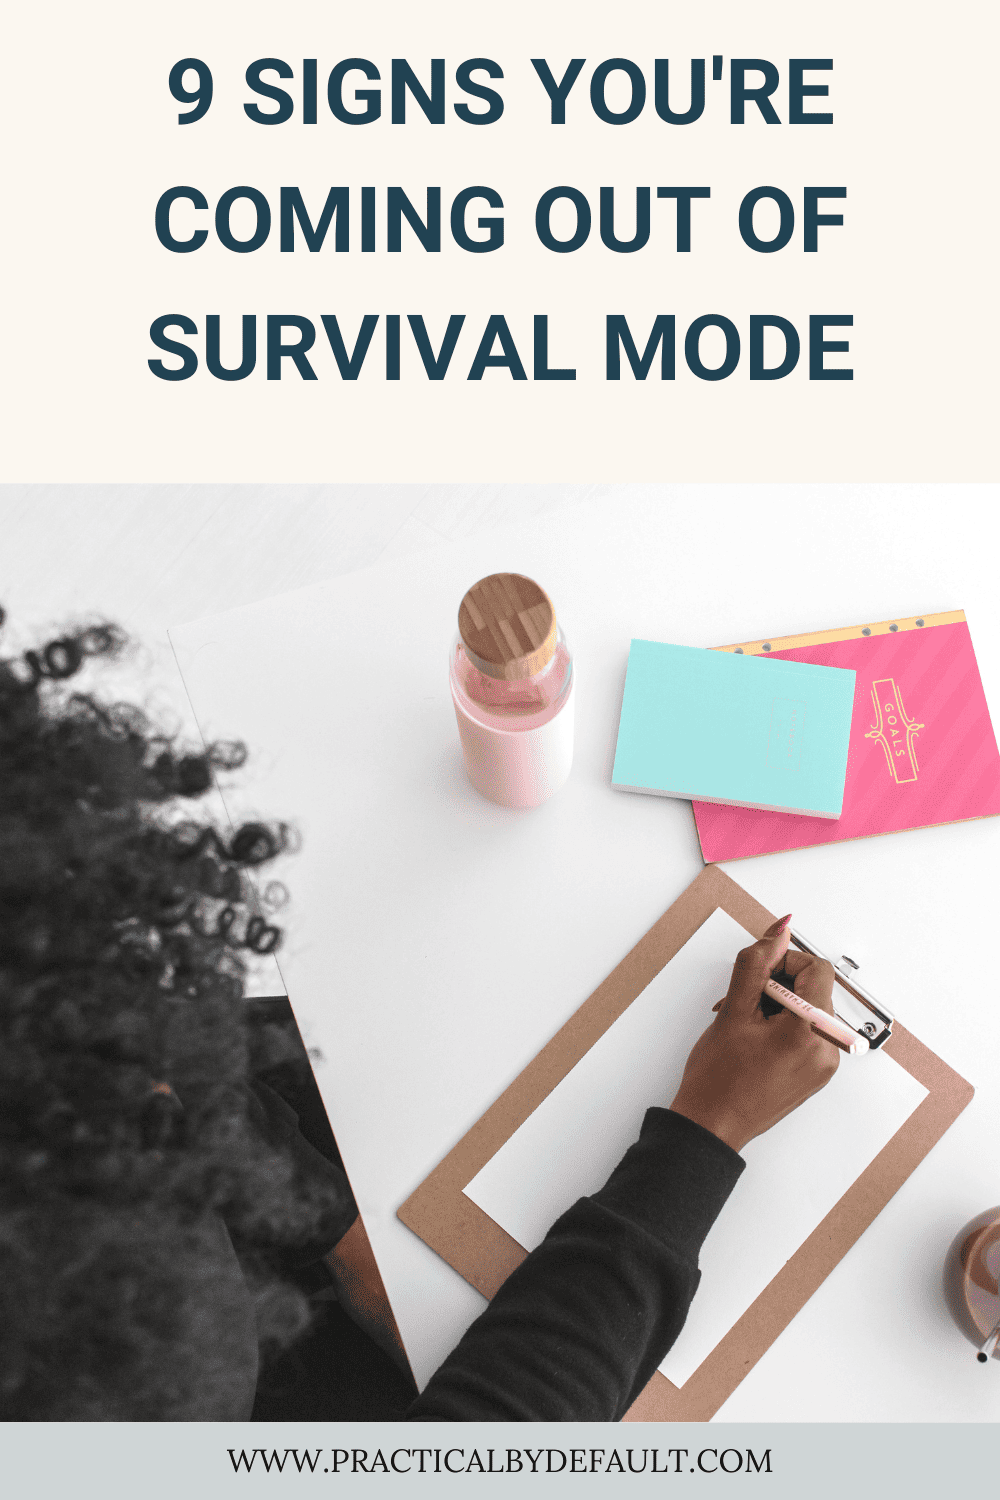 Signs You Are Coming Out of Survival Mode